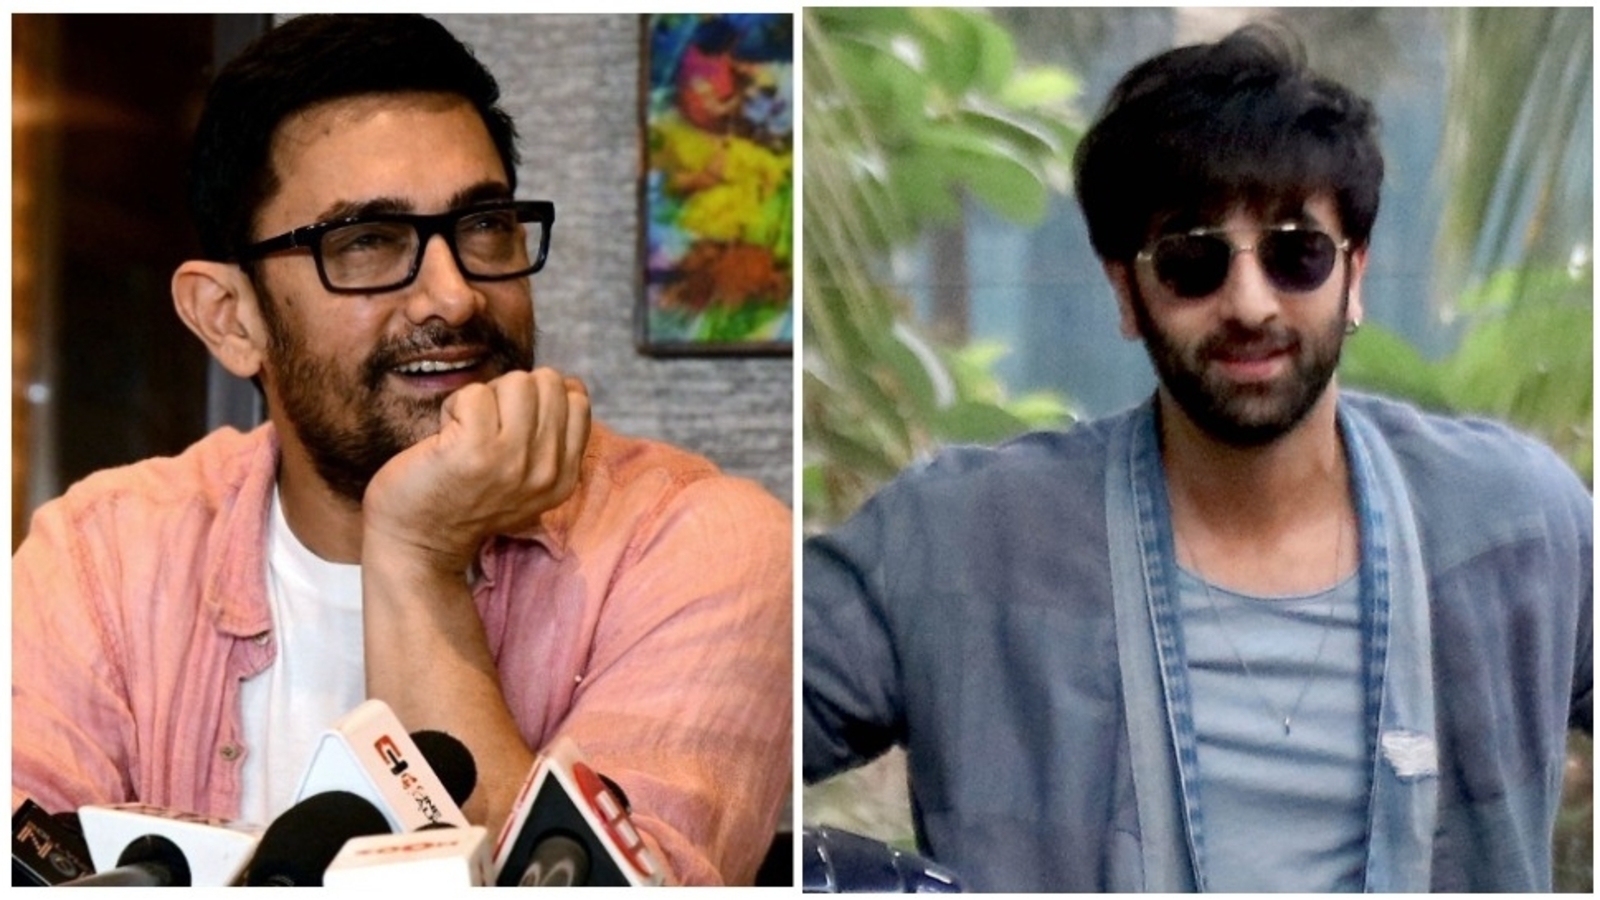 Aamir Khan and Ranbir Kapoor to come together for Anurag Basu’s film? Here’s what the filmmaker has to say